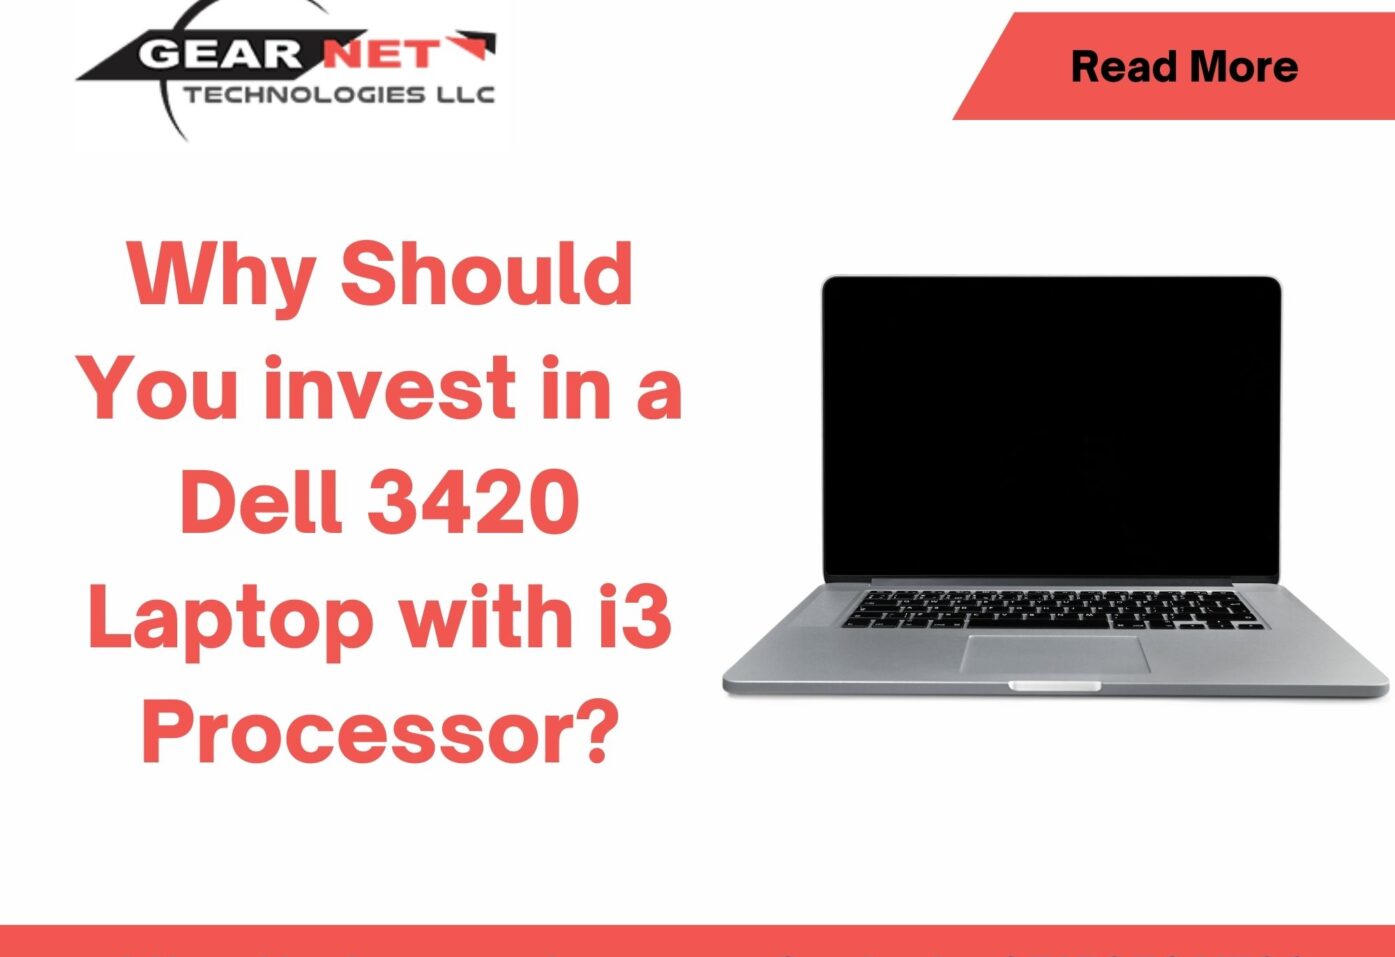 Why should you invest in a Dell 3420 Laptop with i3 Processor Gear Net Technologies LLC